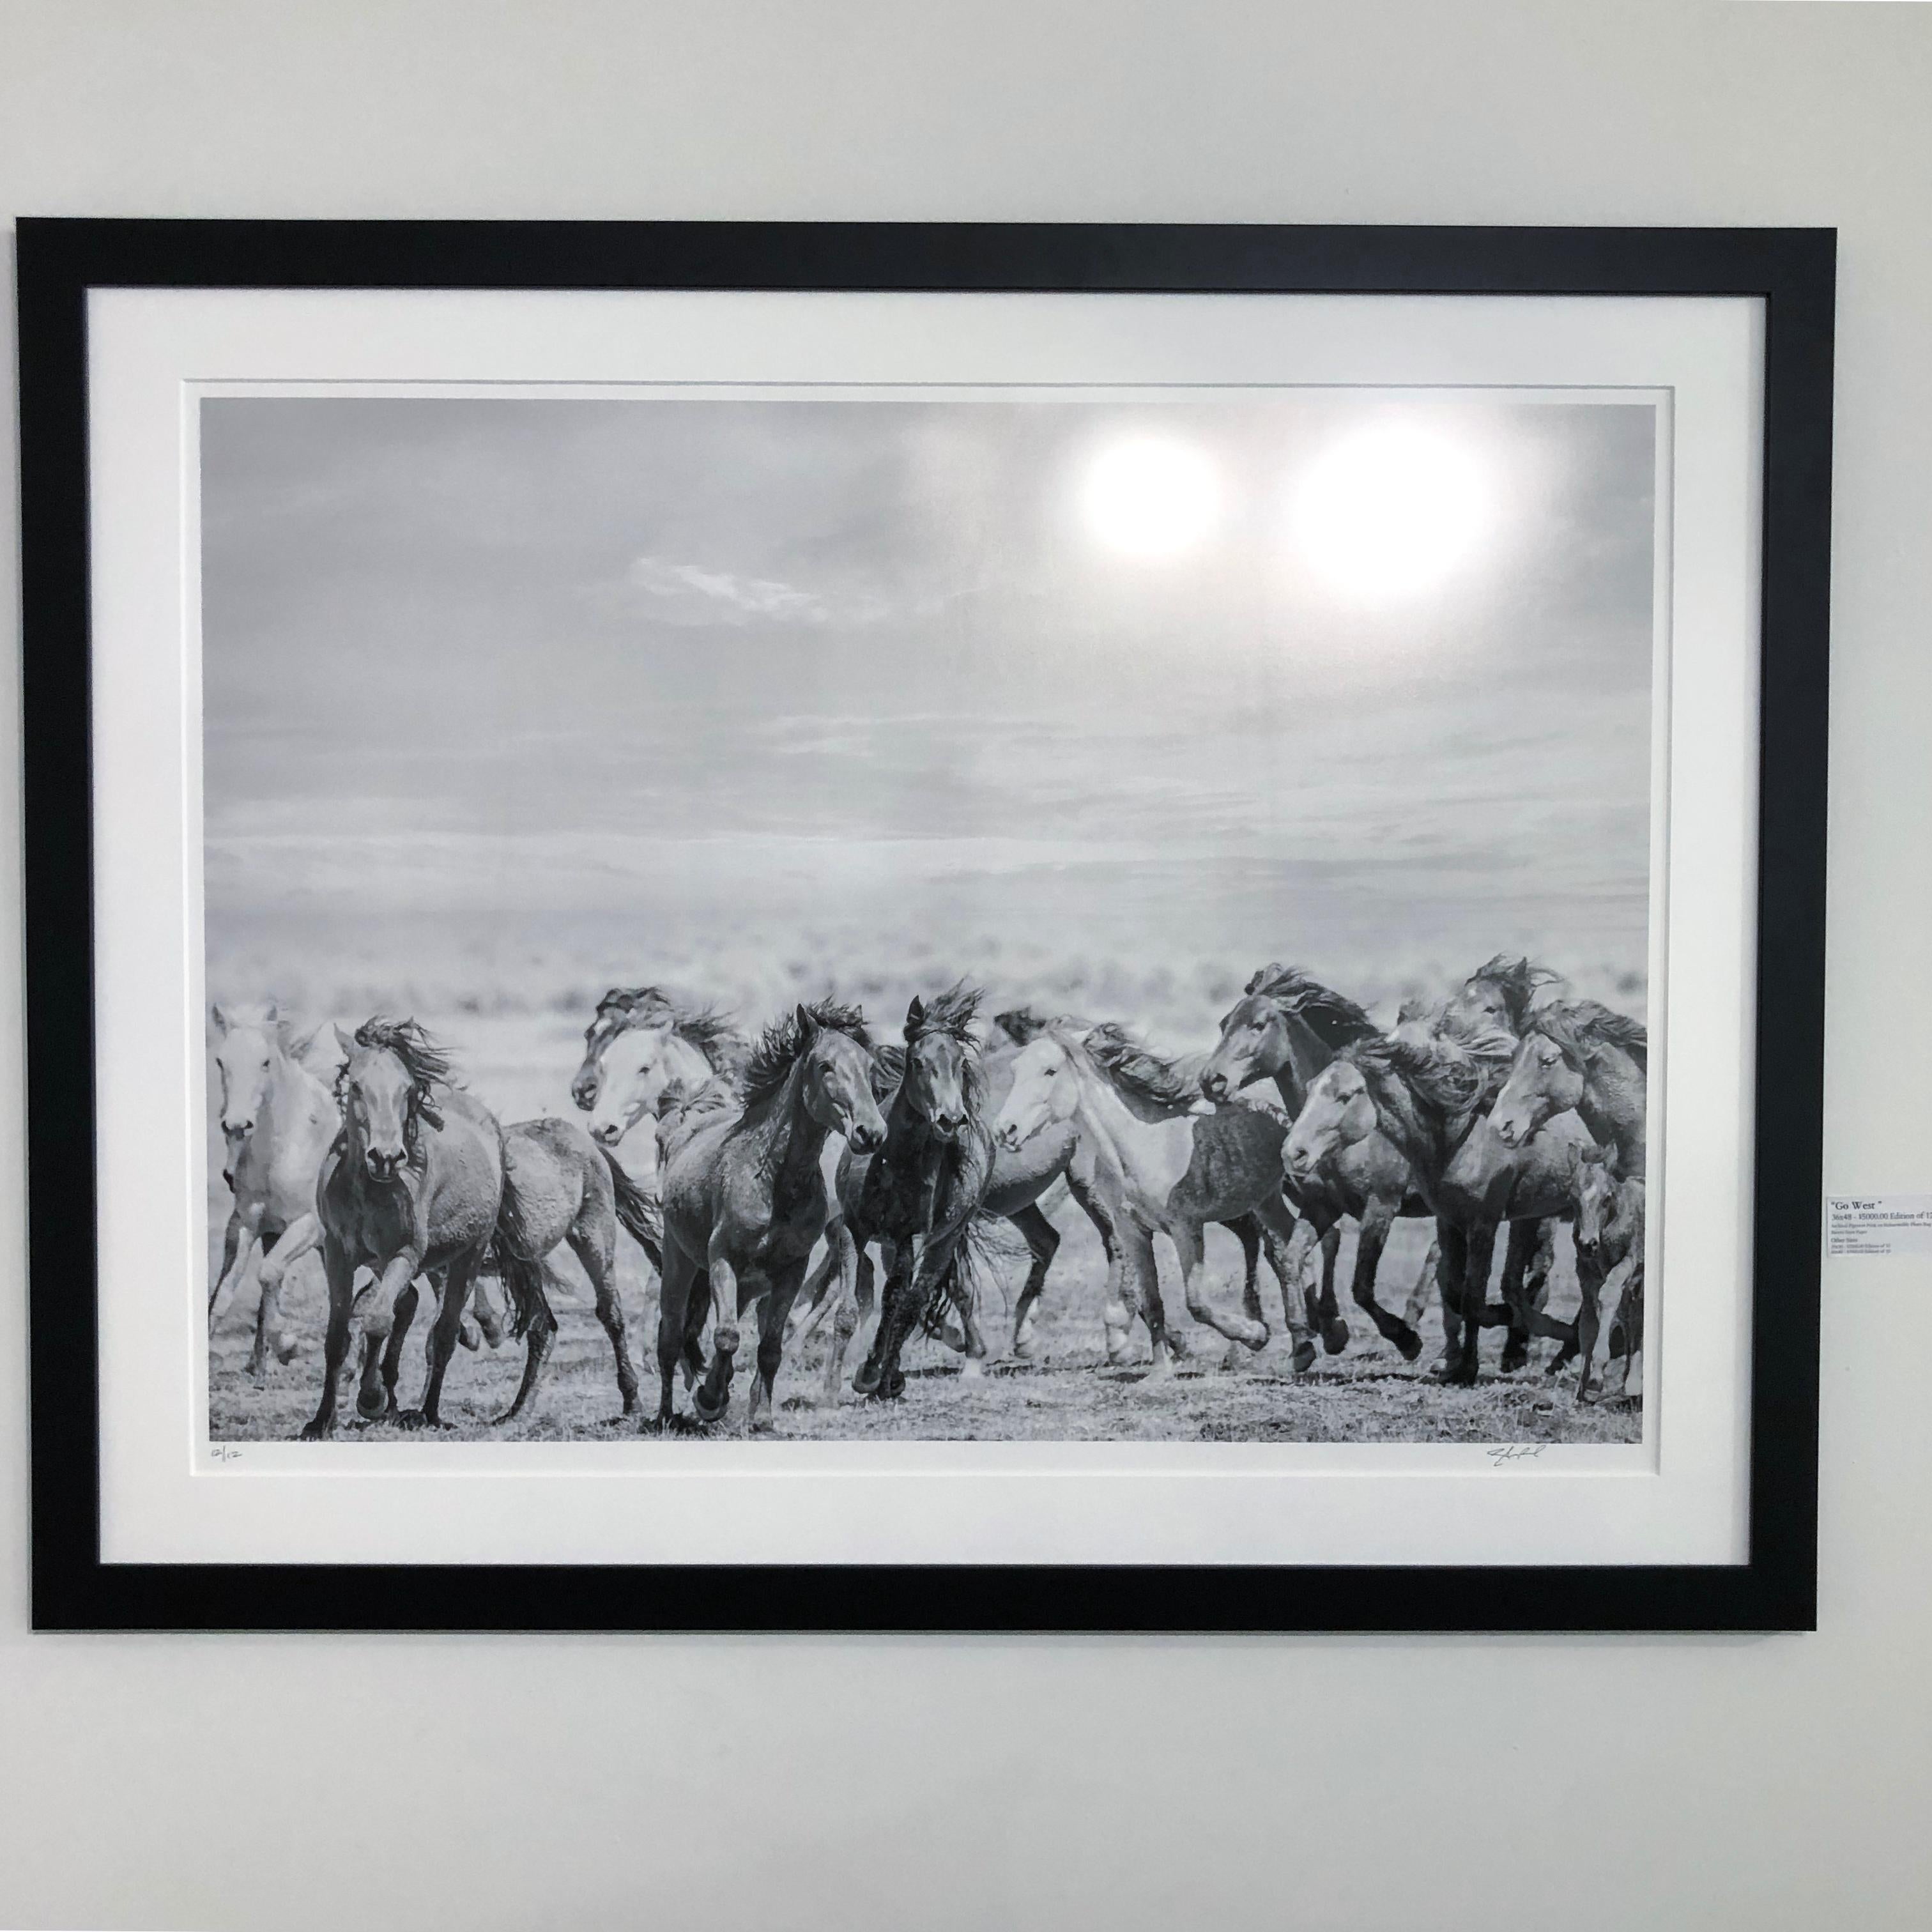 This is a contemporary black and white photograph of wild horses. 
